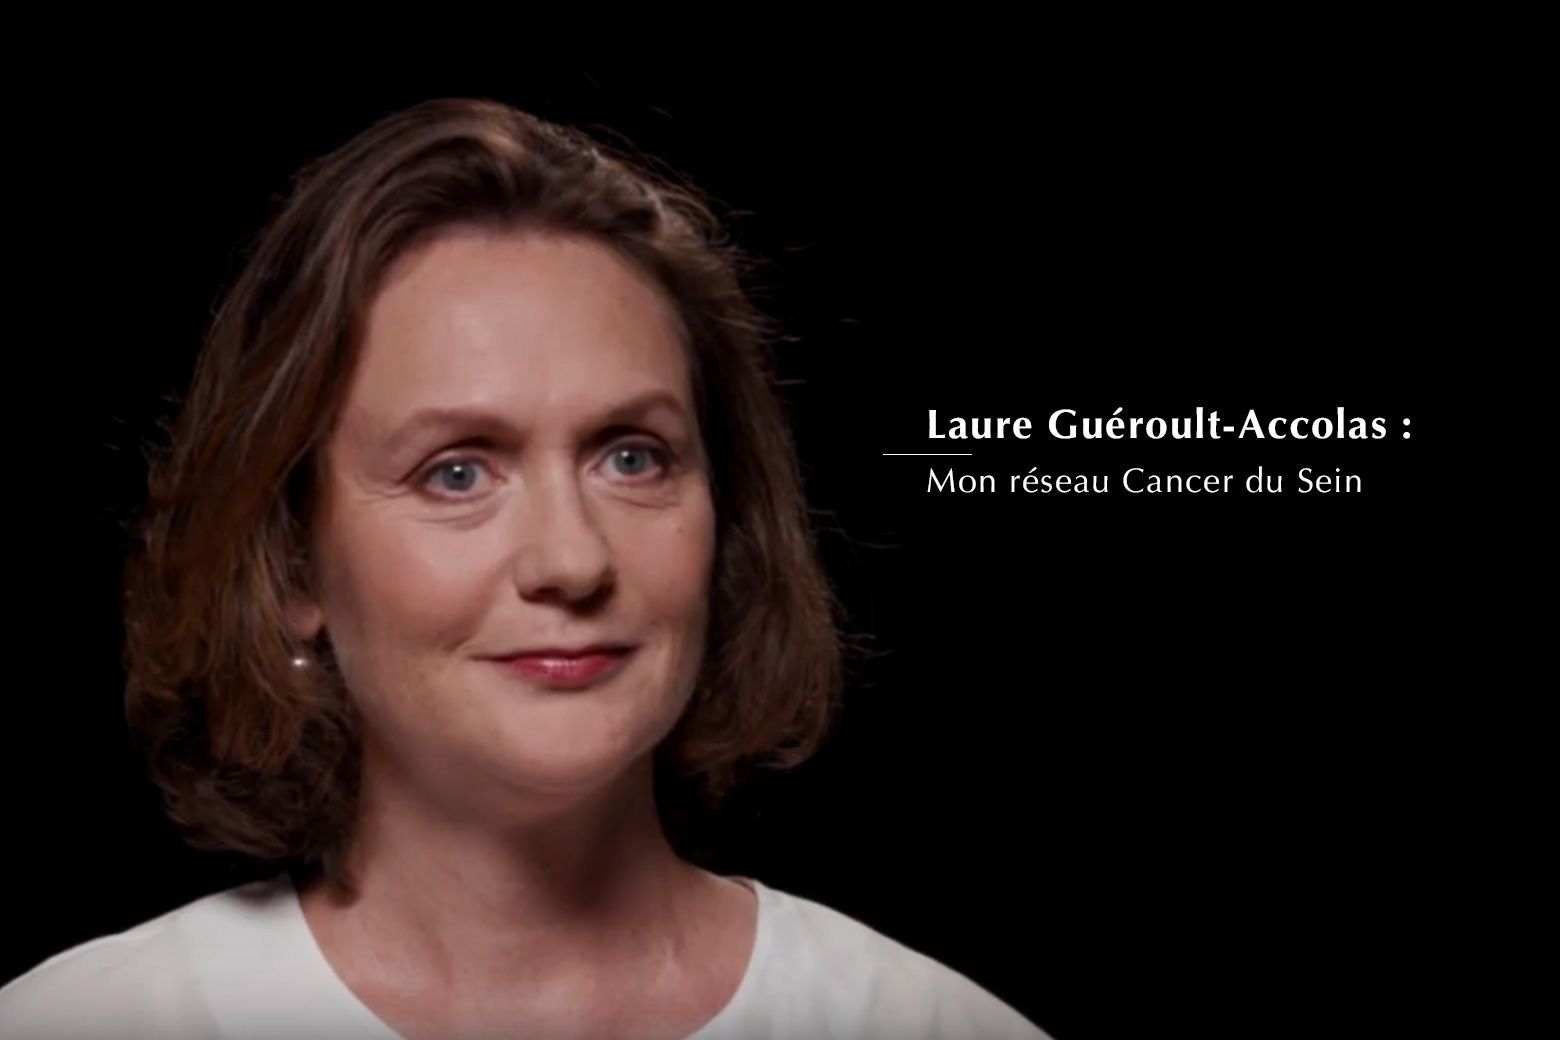 Laure GUÉROULT ACCOLAS - "My Breast Cancer Network”